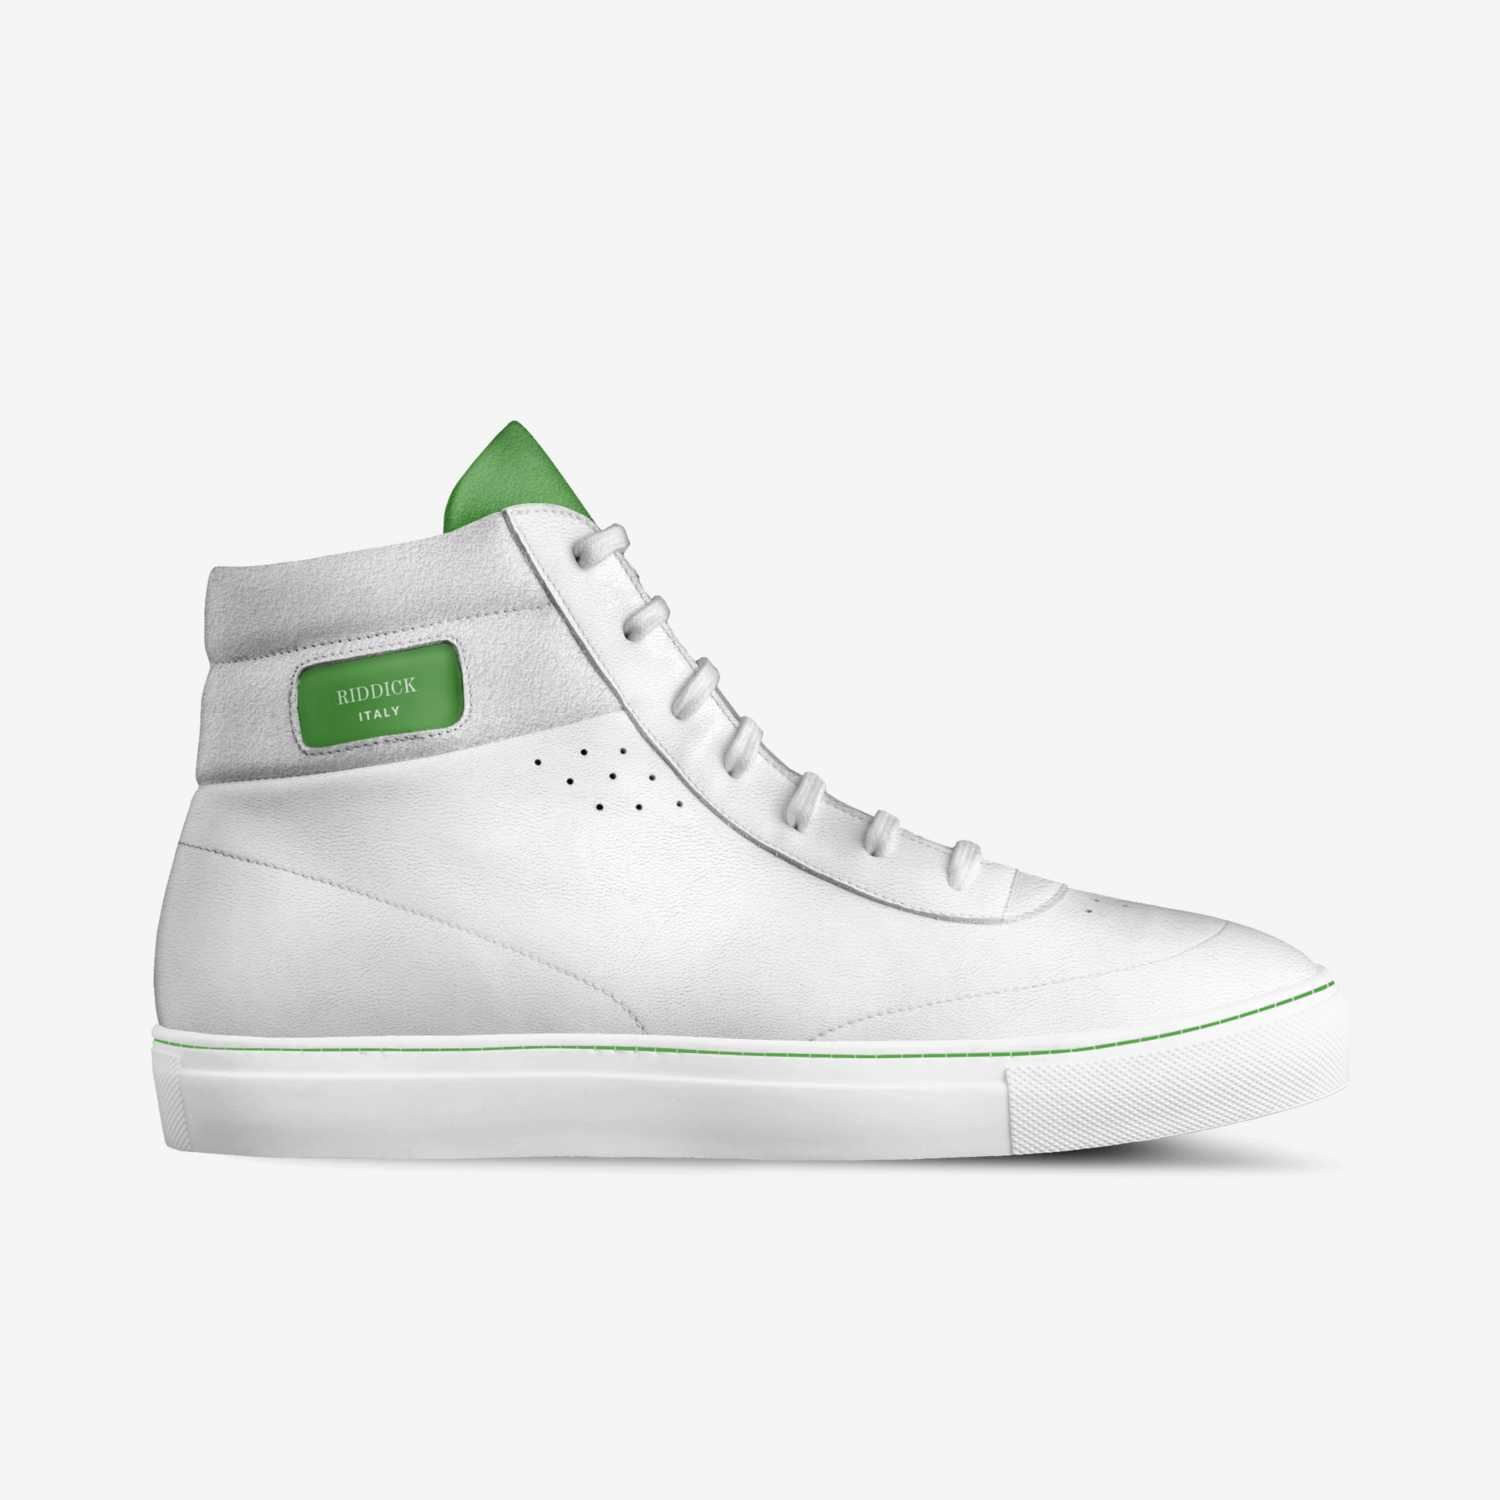 WHITE-OUT [UNISEX] - Riddick Shoes Shoe Riddick Shoes   